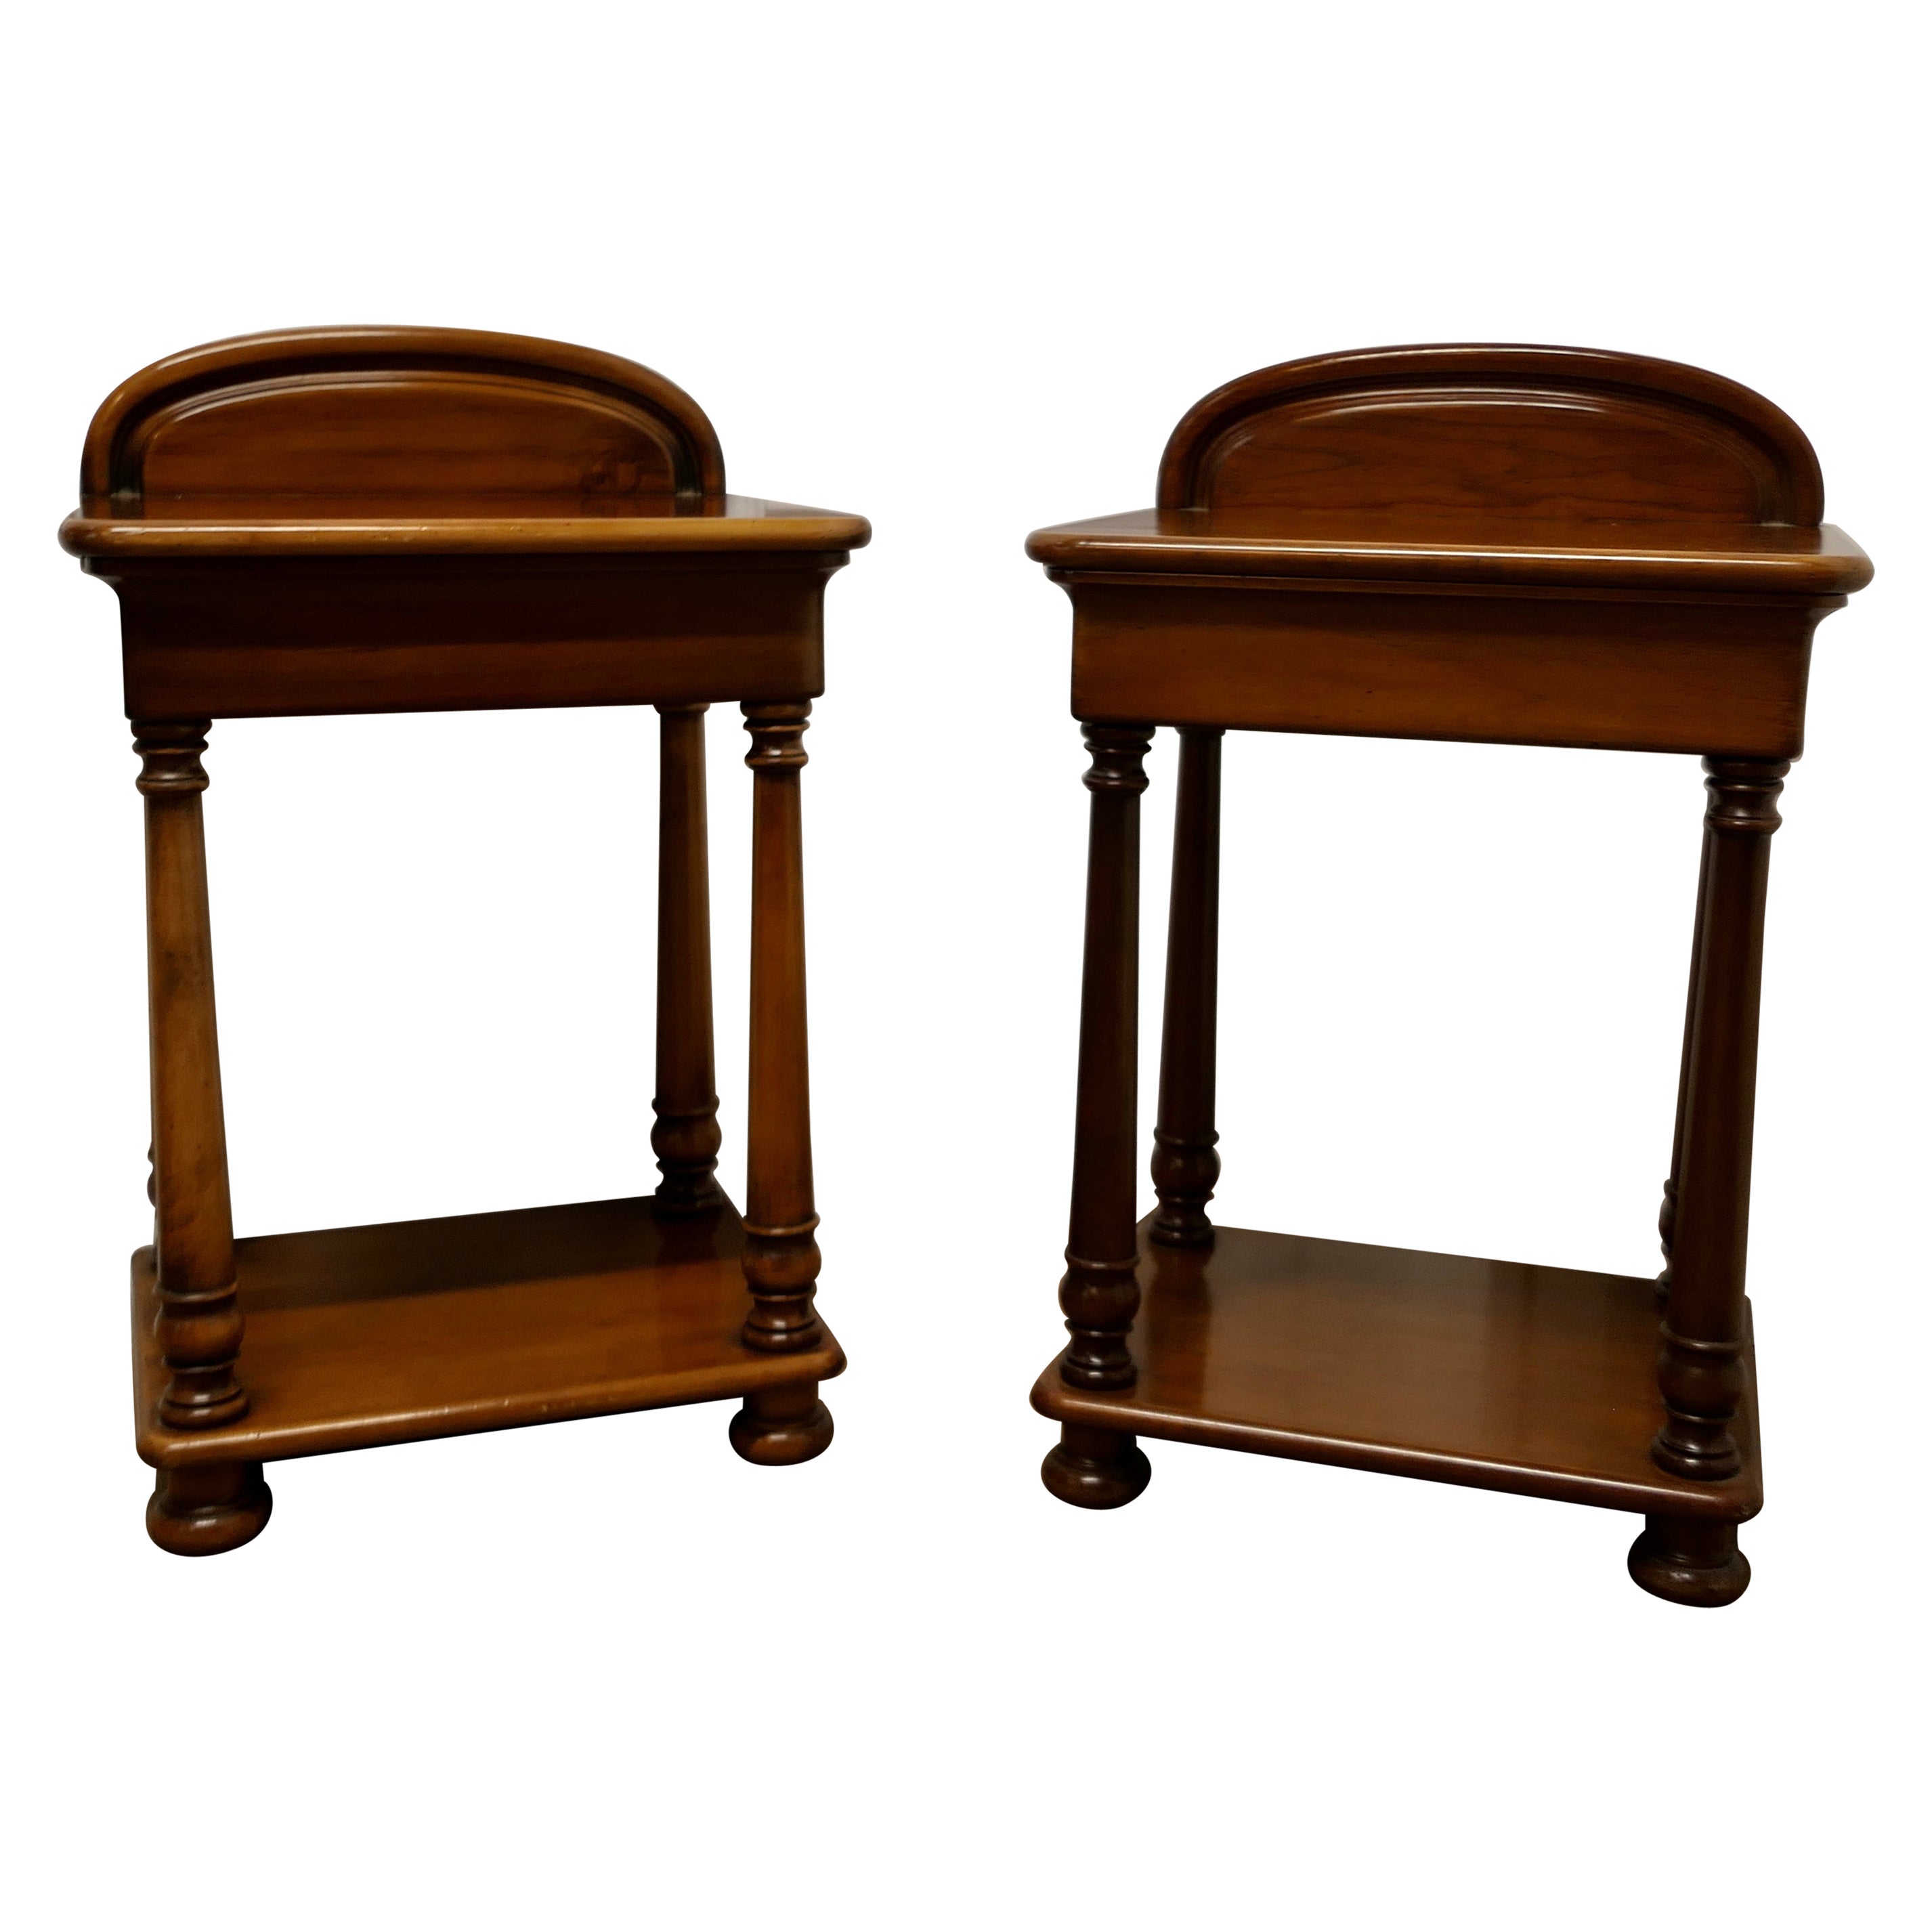 Pair of Cherry Wood Night Tables Bedside Cabinet